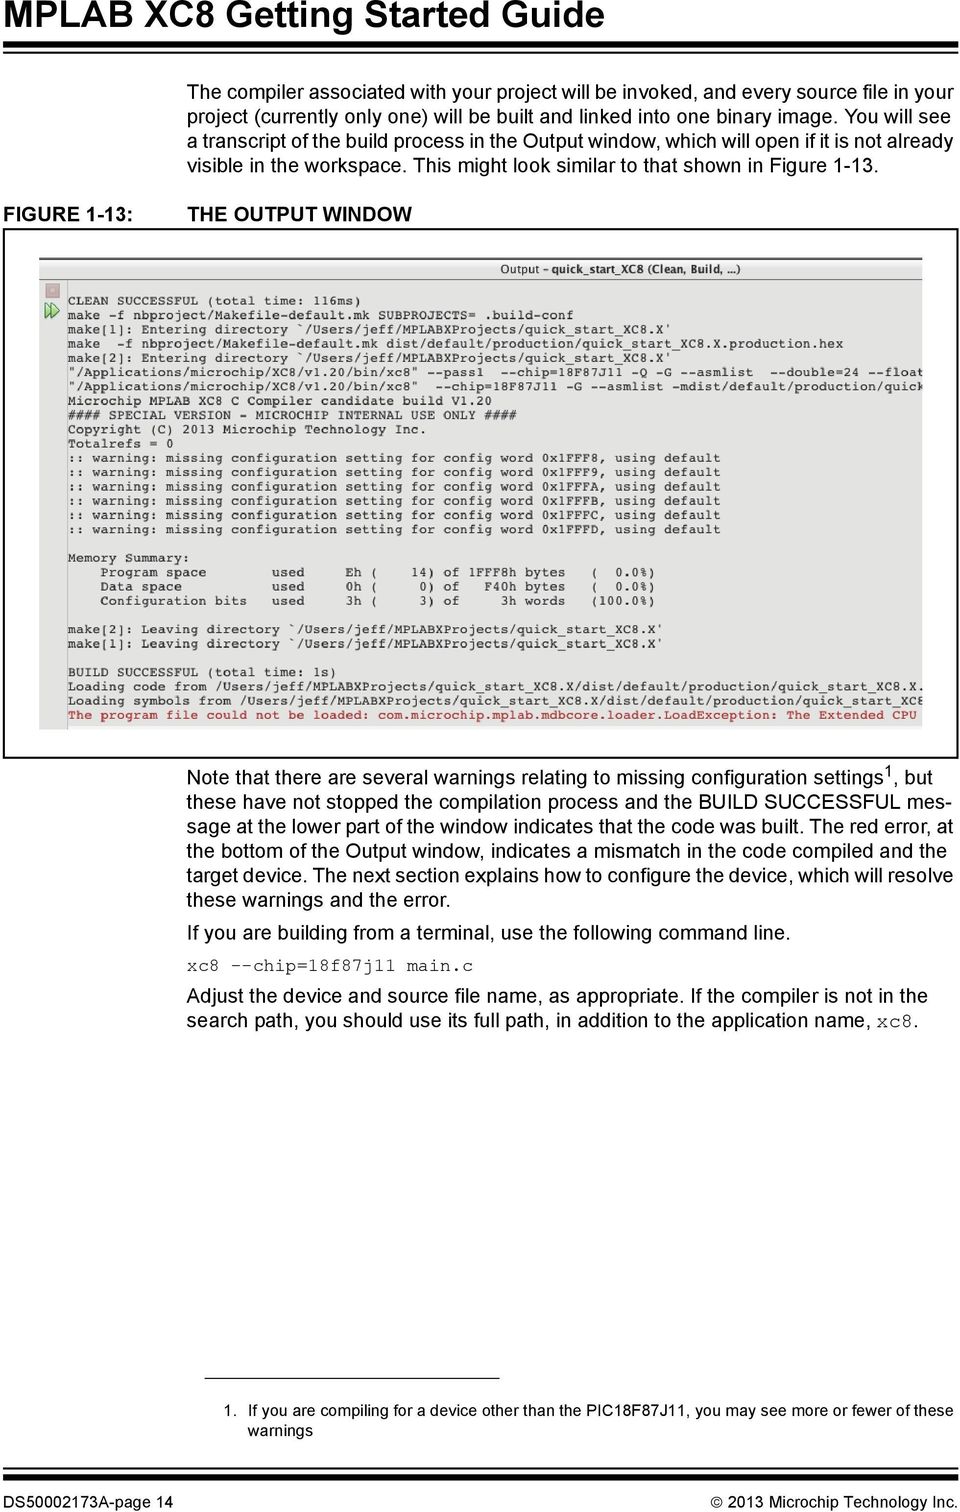 FIGURE 1-13: THE OUTPUT WINDOW Note that there are several warnings relating to missing configuration settings 1, but these have not stopped the compilation process and the BUILD SUCCESSFUL message